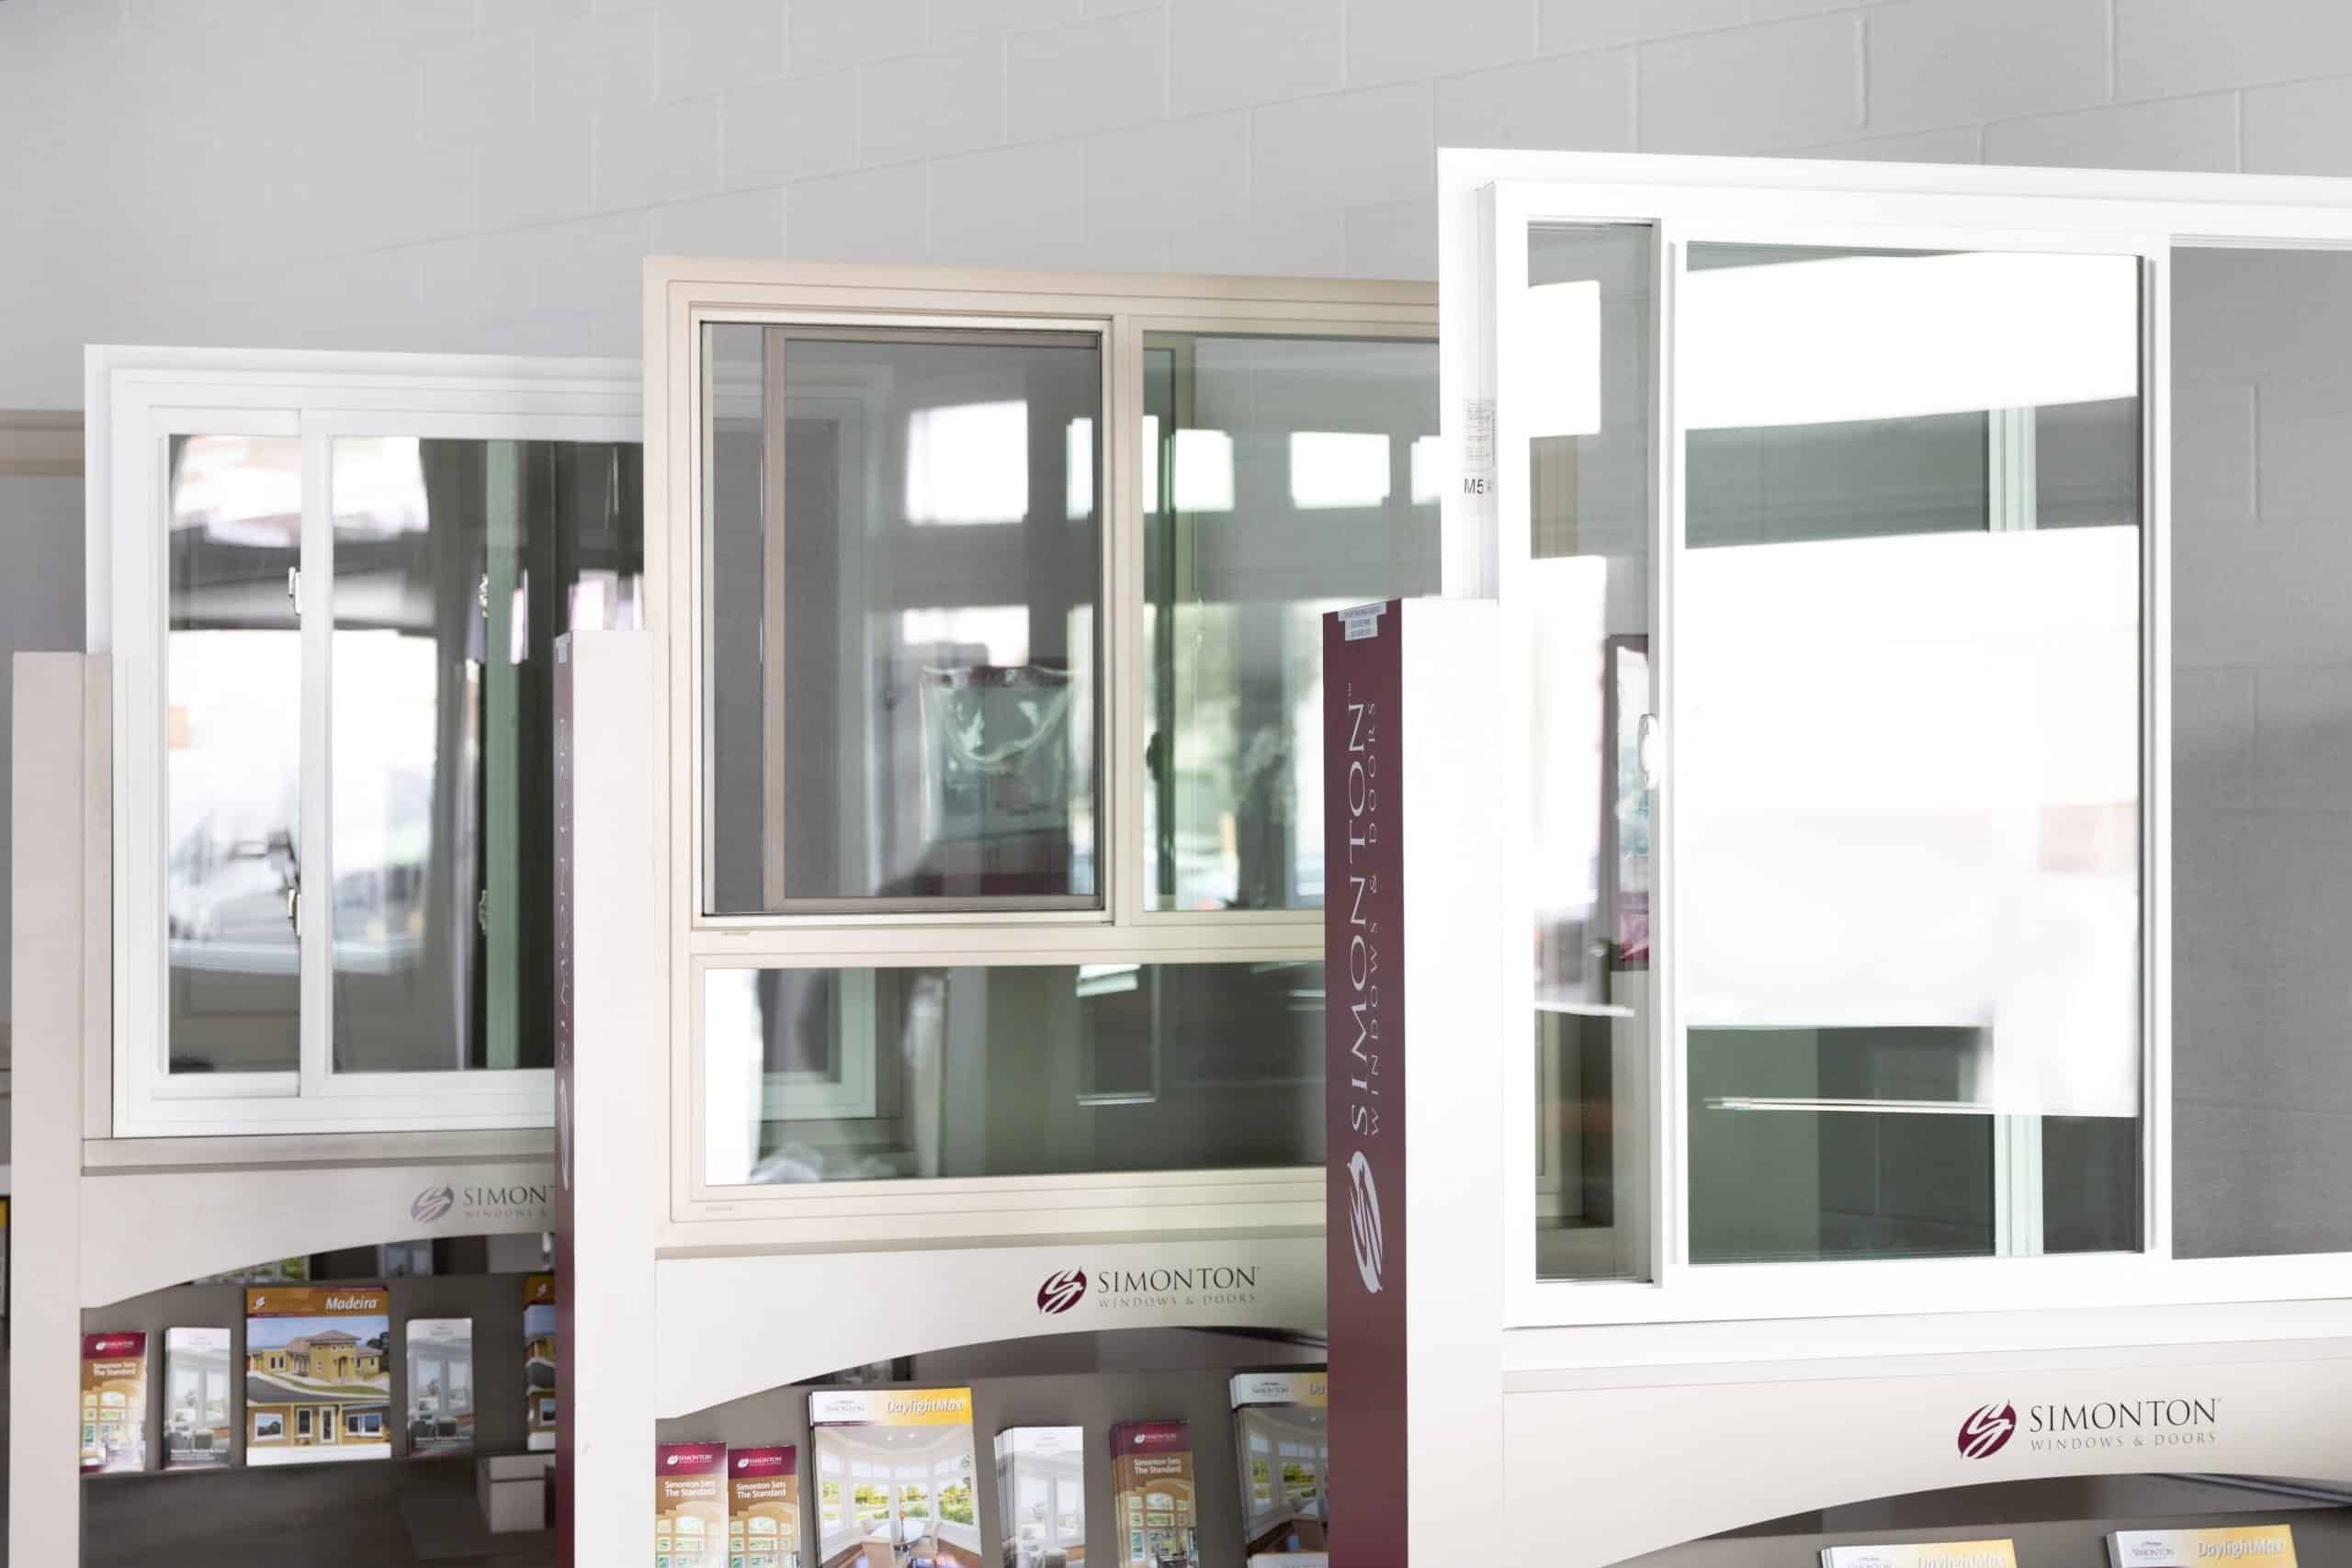 Vinyl replacement windows from Coughlin Windows